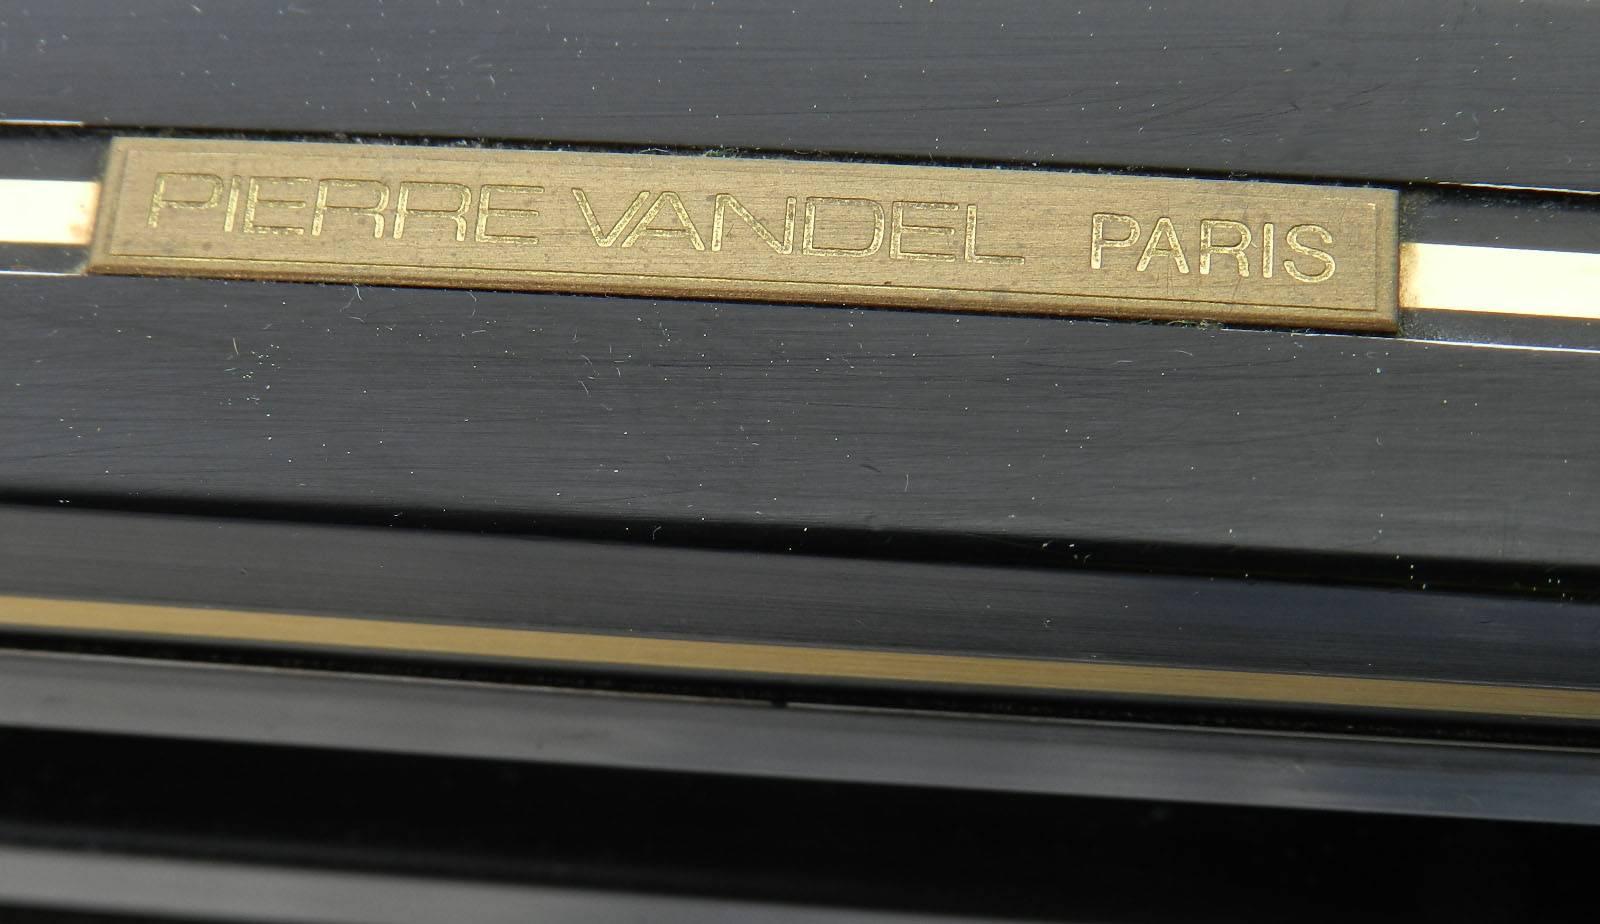 Mid-Century coffee table by Pierre Vandel, Paris, France
Makers label
Black lacquered metal frame with brass trim
Original beveled glass top
Overall good vintage condition minor scattered surface wear to frame, just one corner has slightly more as